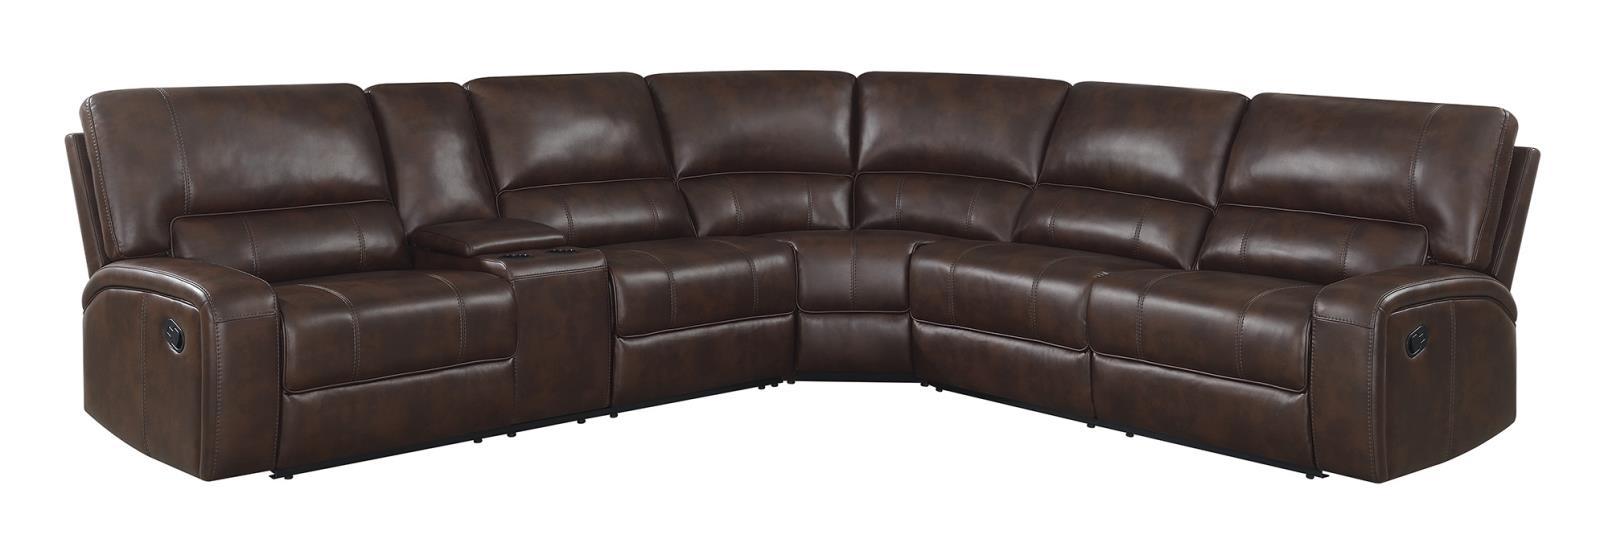 Jesse James MOTION SECTIONAL